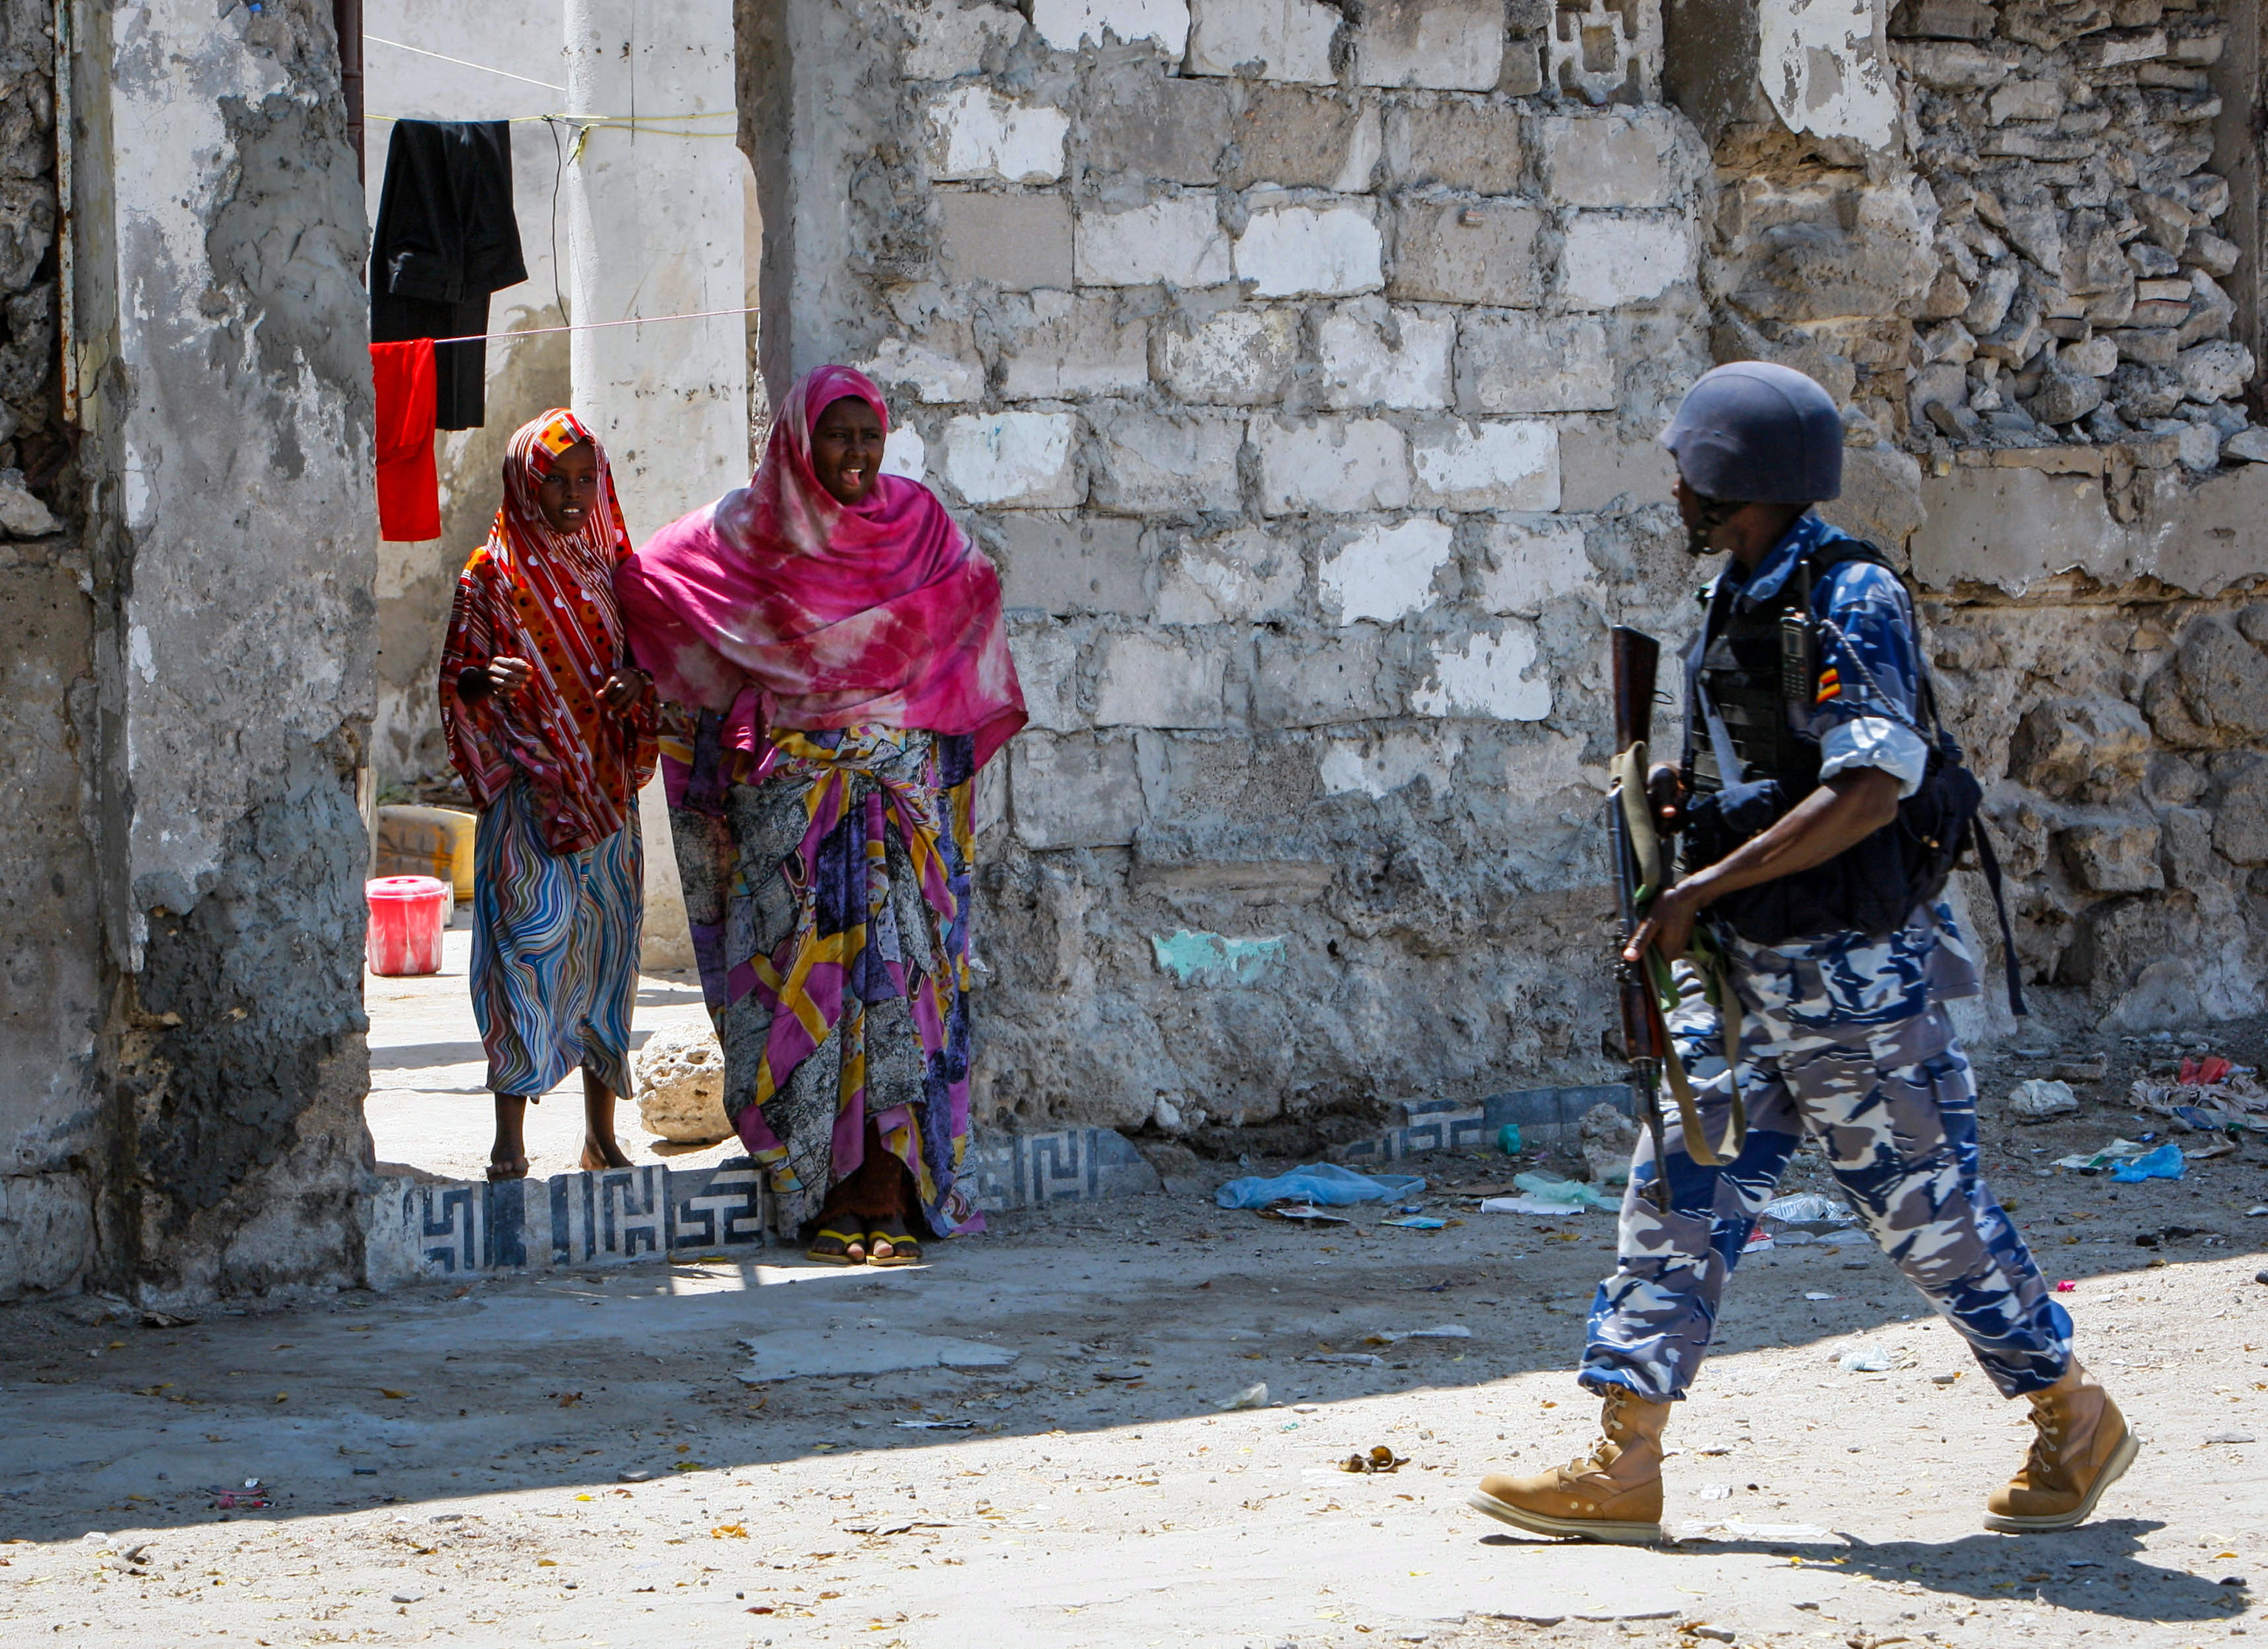 A soldier of the African Union Mission in Somalia (AMISOM) on patrol in Mogadishu